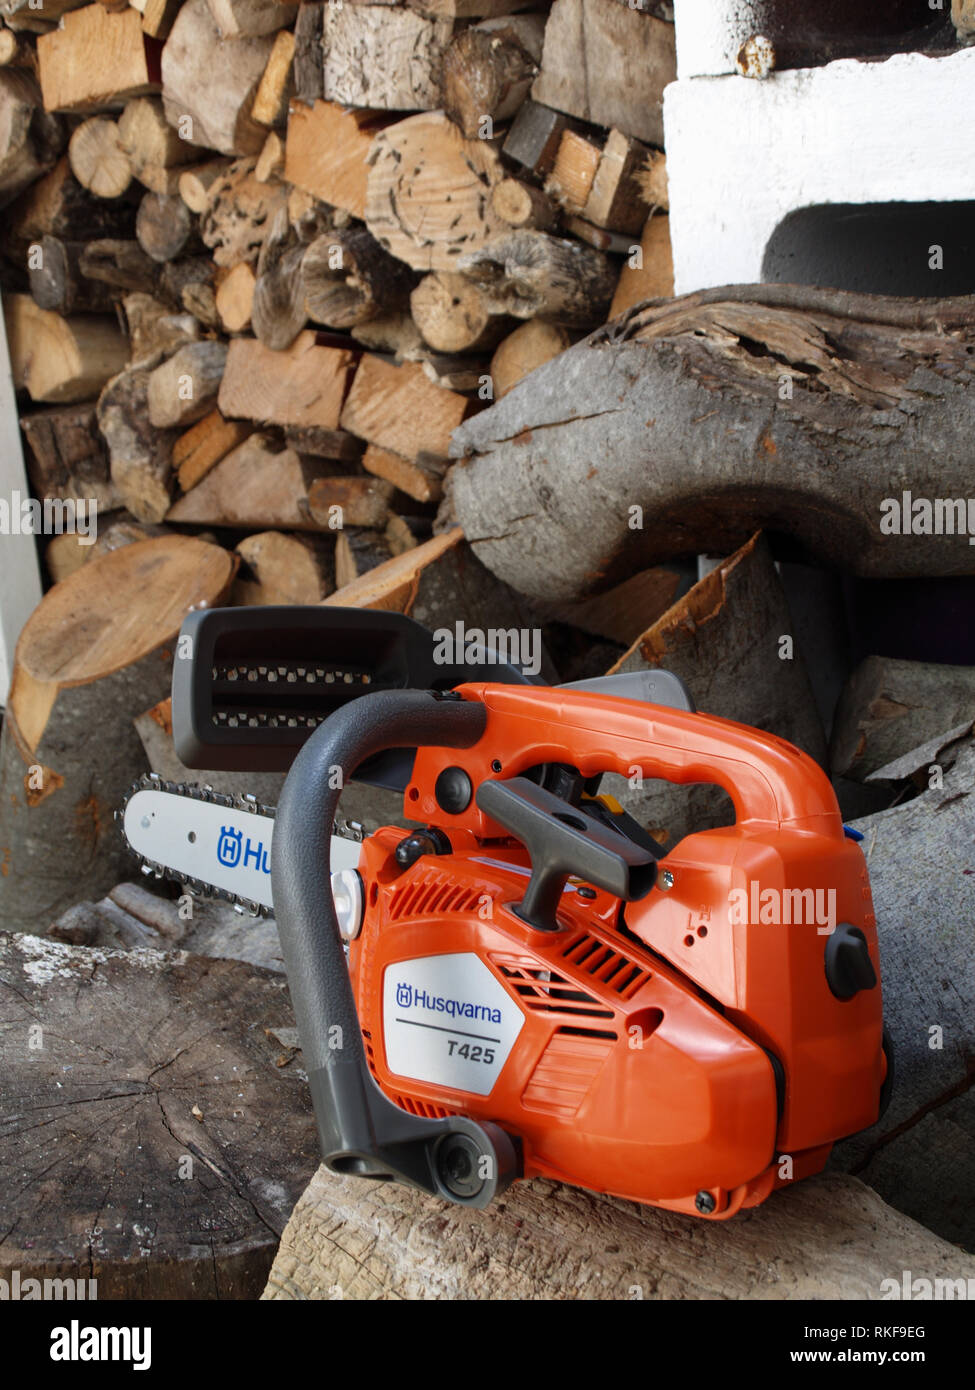 Brand new Husqvarna T425 Chain Saw on woodpile ready fro use Stock Photo -  Alamy